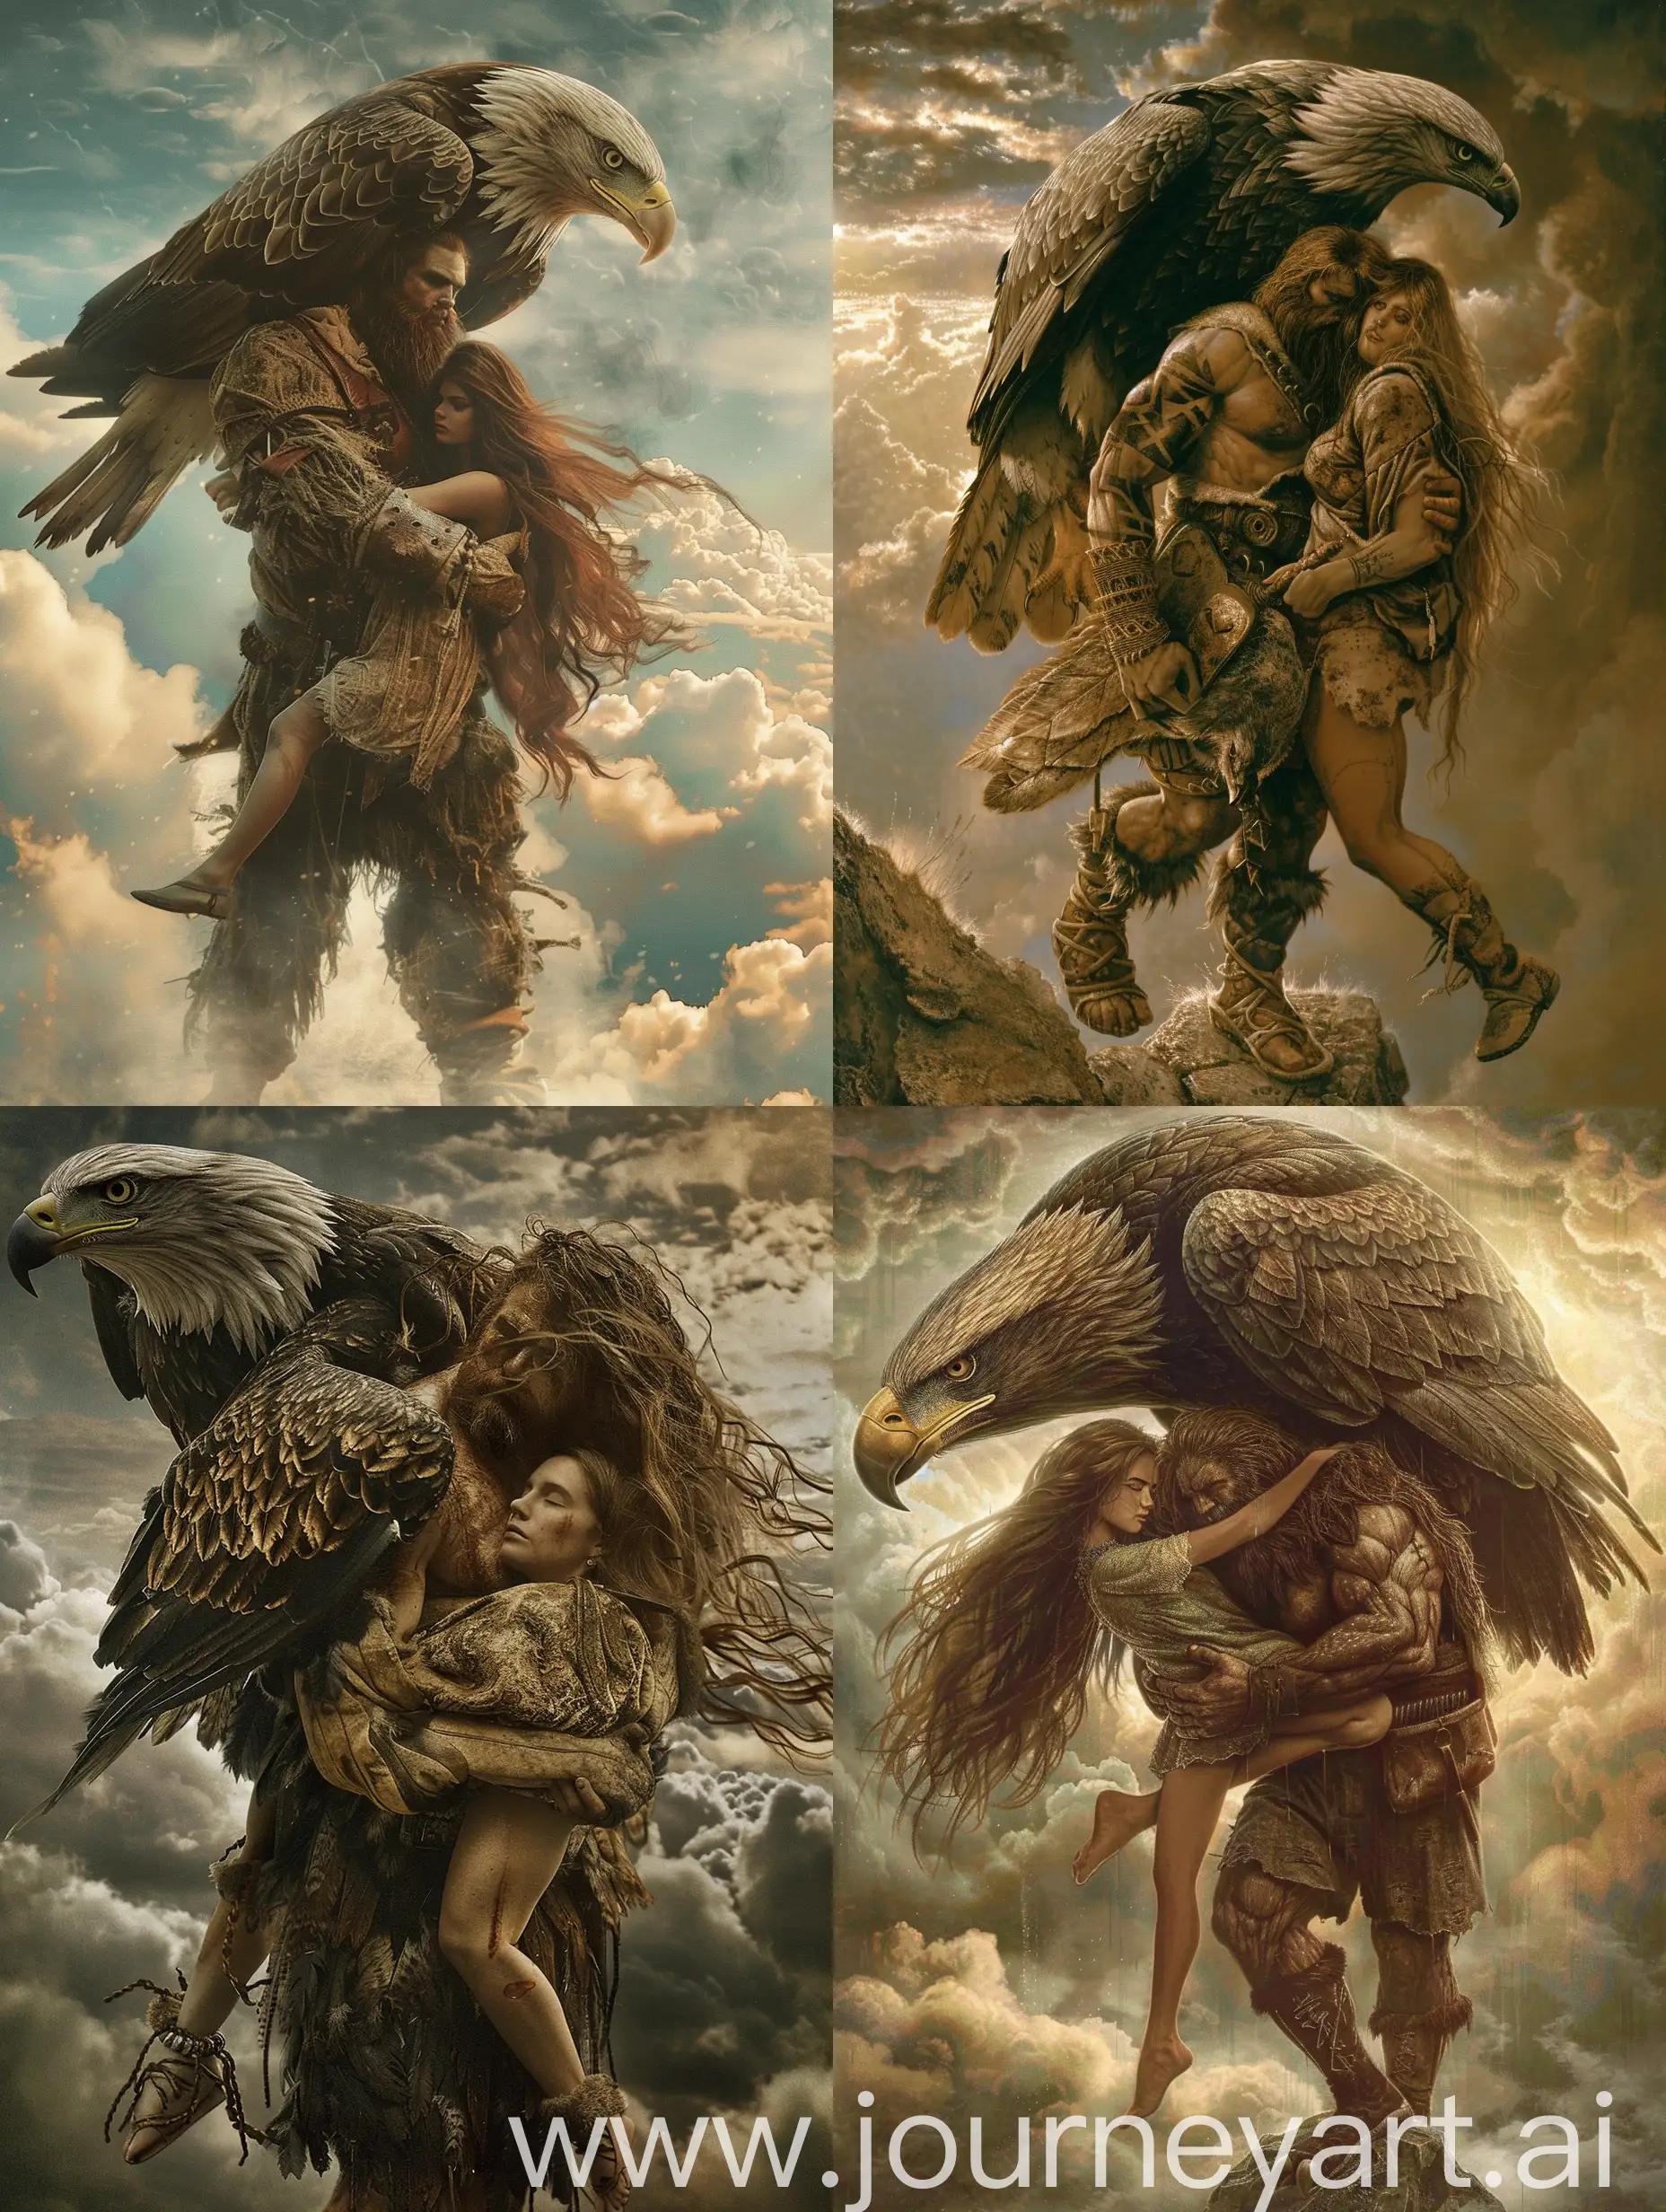 HEAVY BODY MAN, CARRYING LONG HAIRED WOMAN, HAS A LARGE EAGLE HEAD, BEAUTIFUL CLOUD BACKGROUND. very detailed on all objects